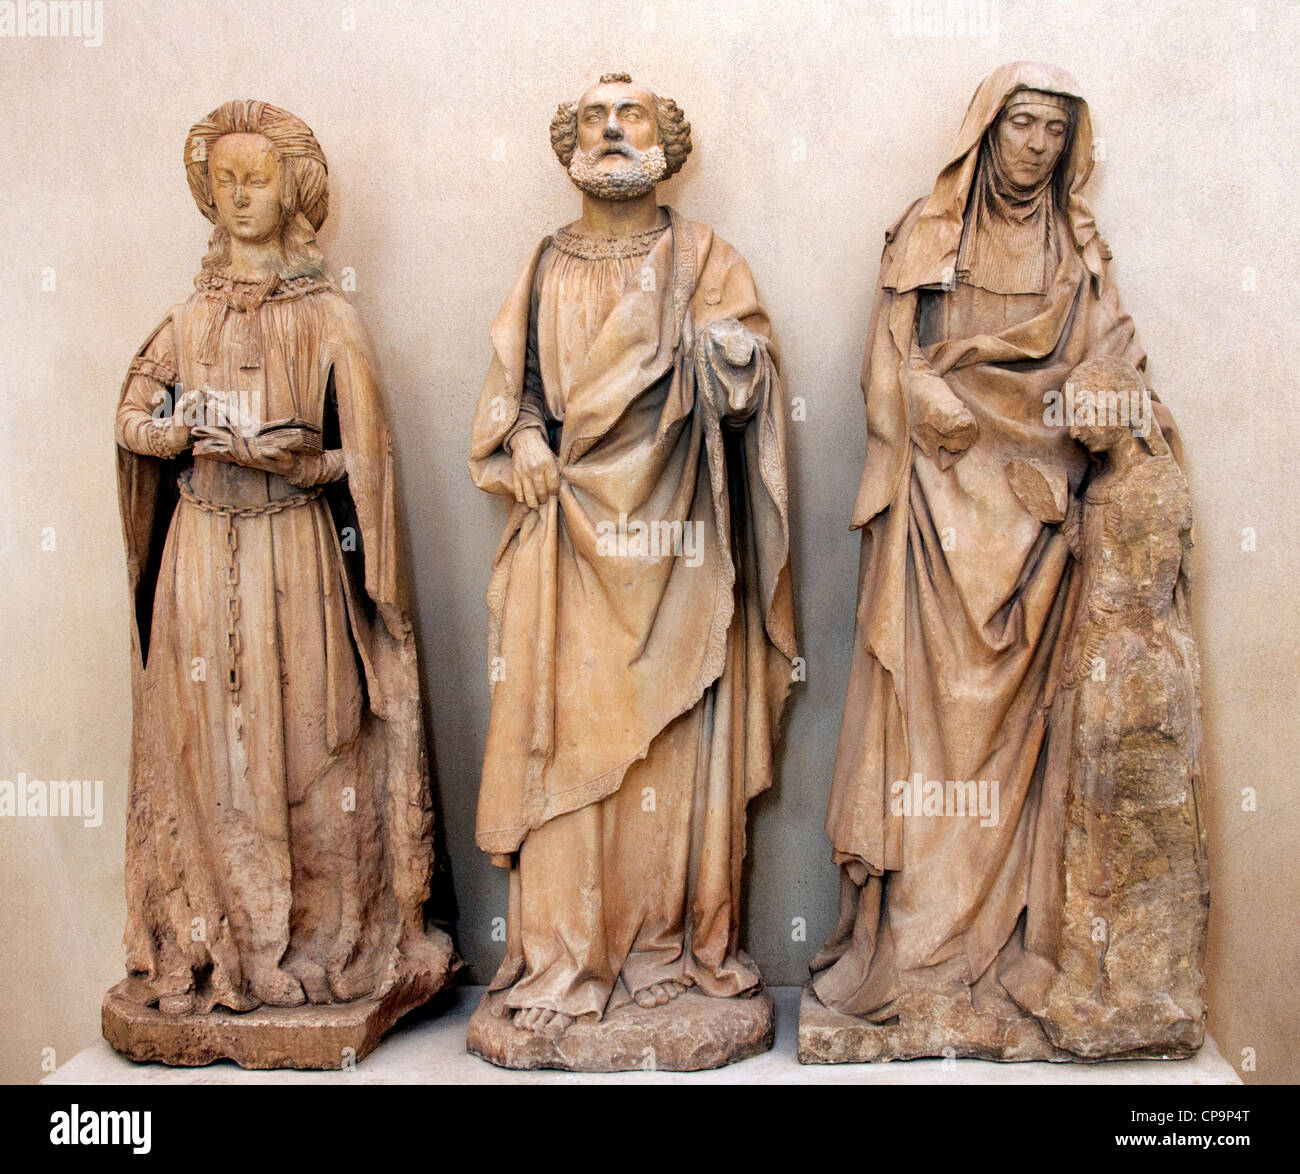 ST Anne - St. Peter - St Suzanne Jean GUILHOMET - Jean de Chartres 1465 - 1516 France French Stock Photo